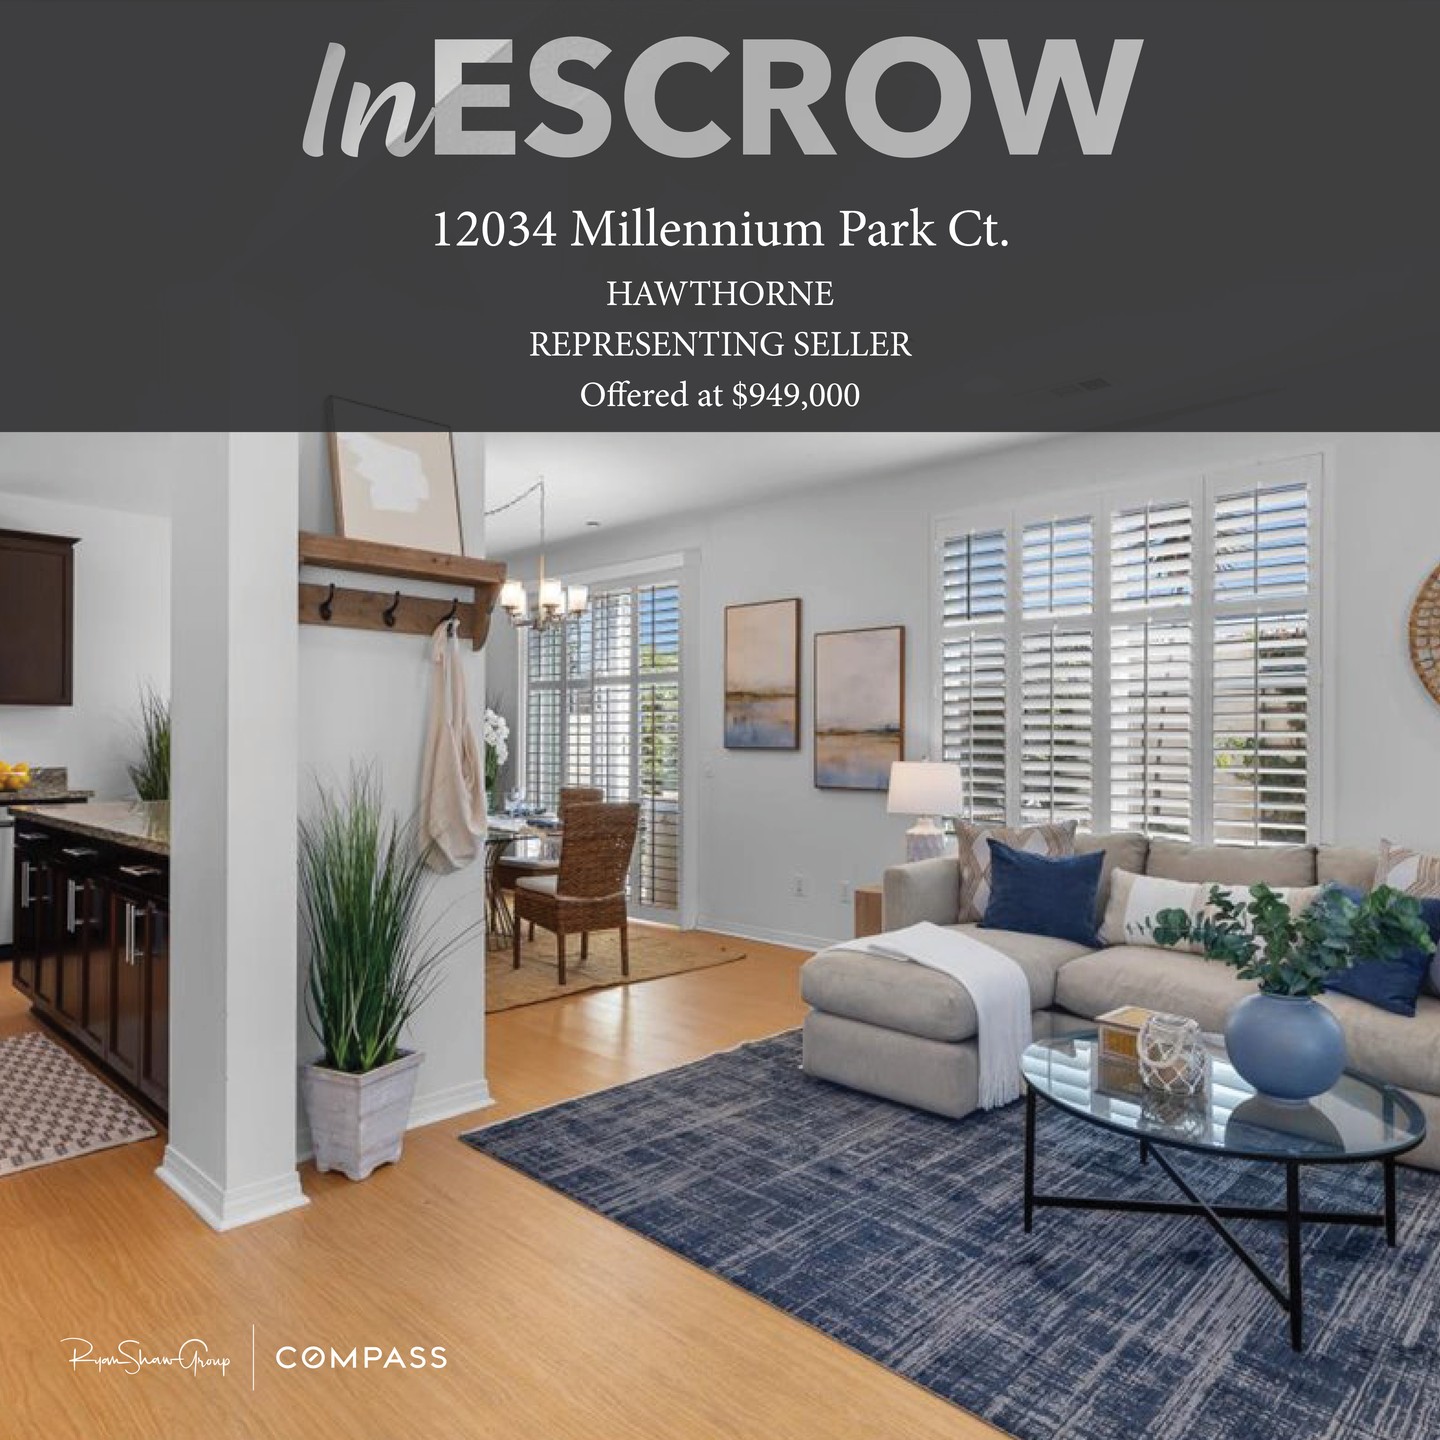 IN ESCROW | A CASE STUDY - All too often...